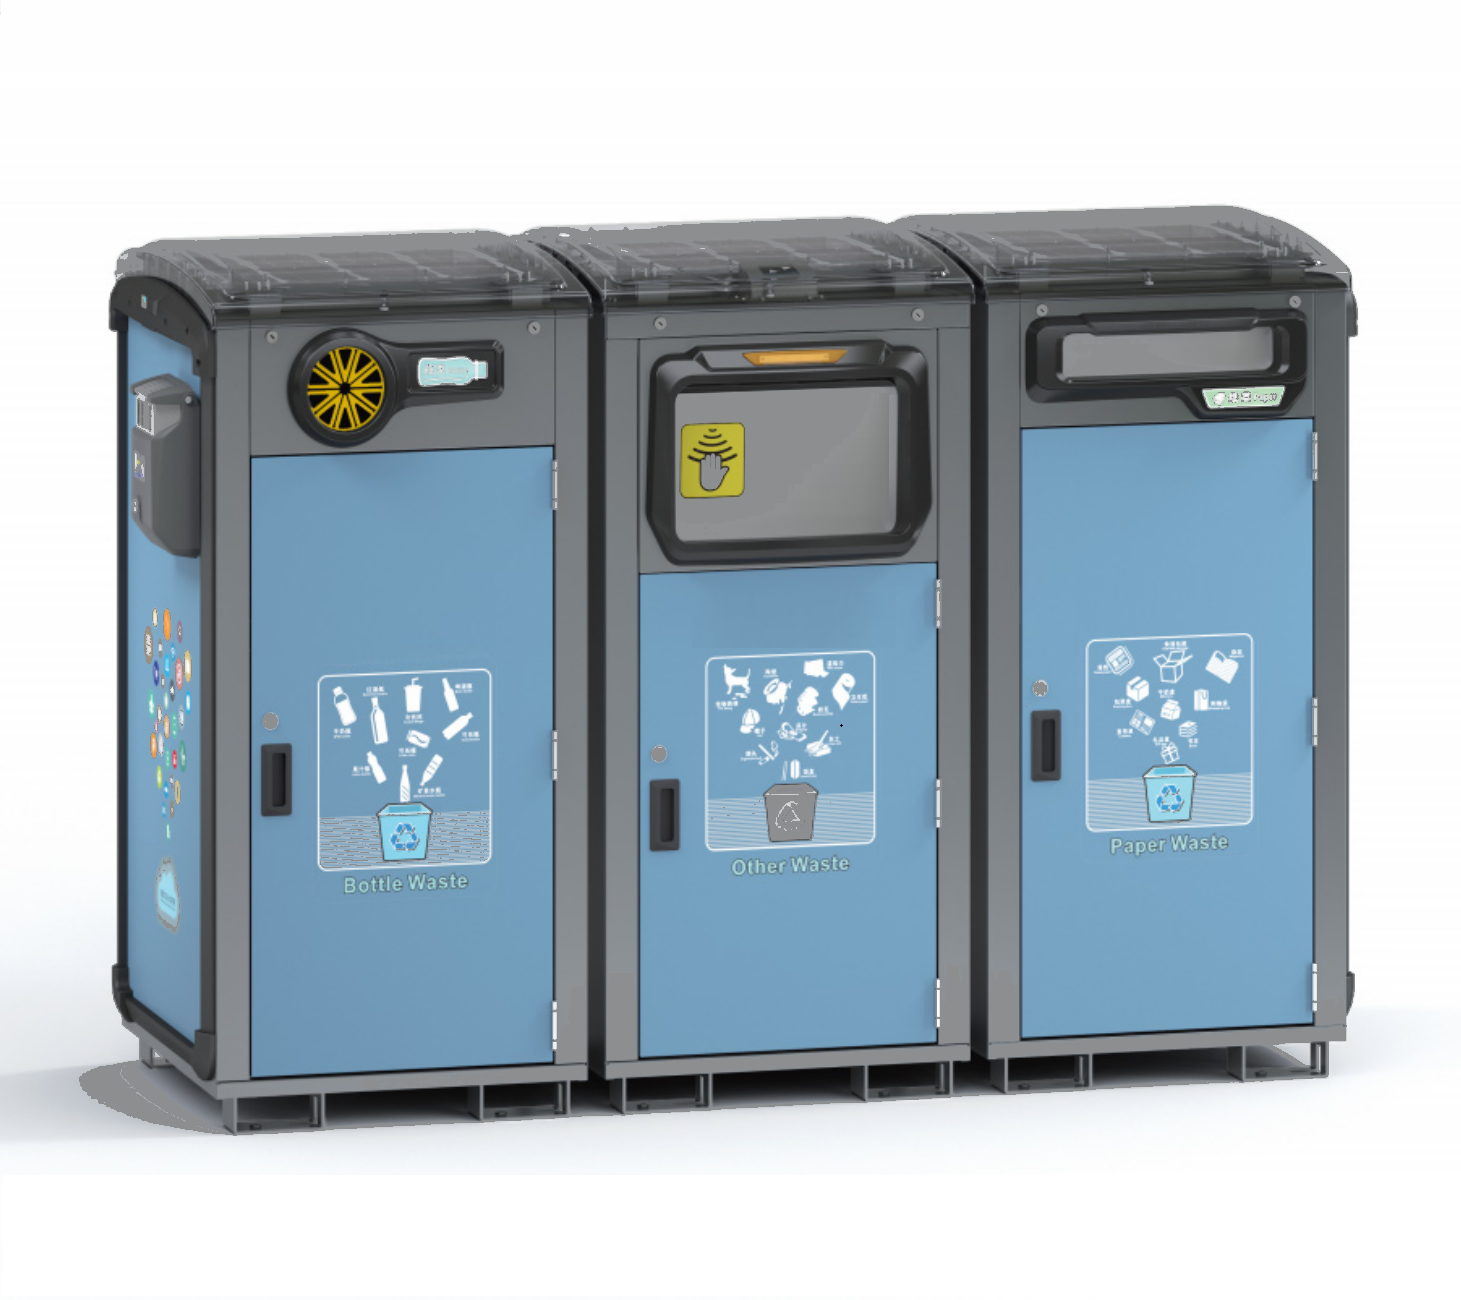 The solar compactor with bottle waste, other garbage and paper waste